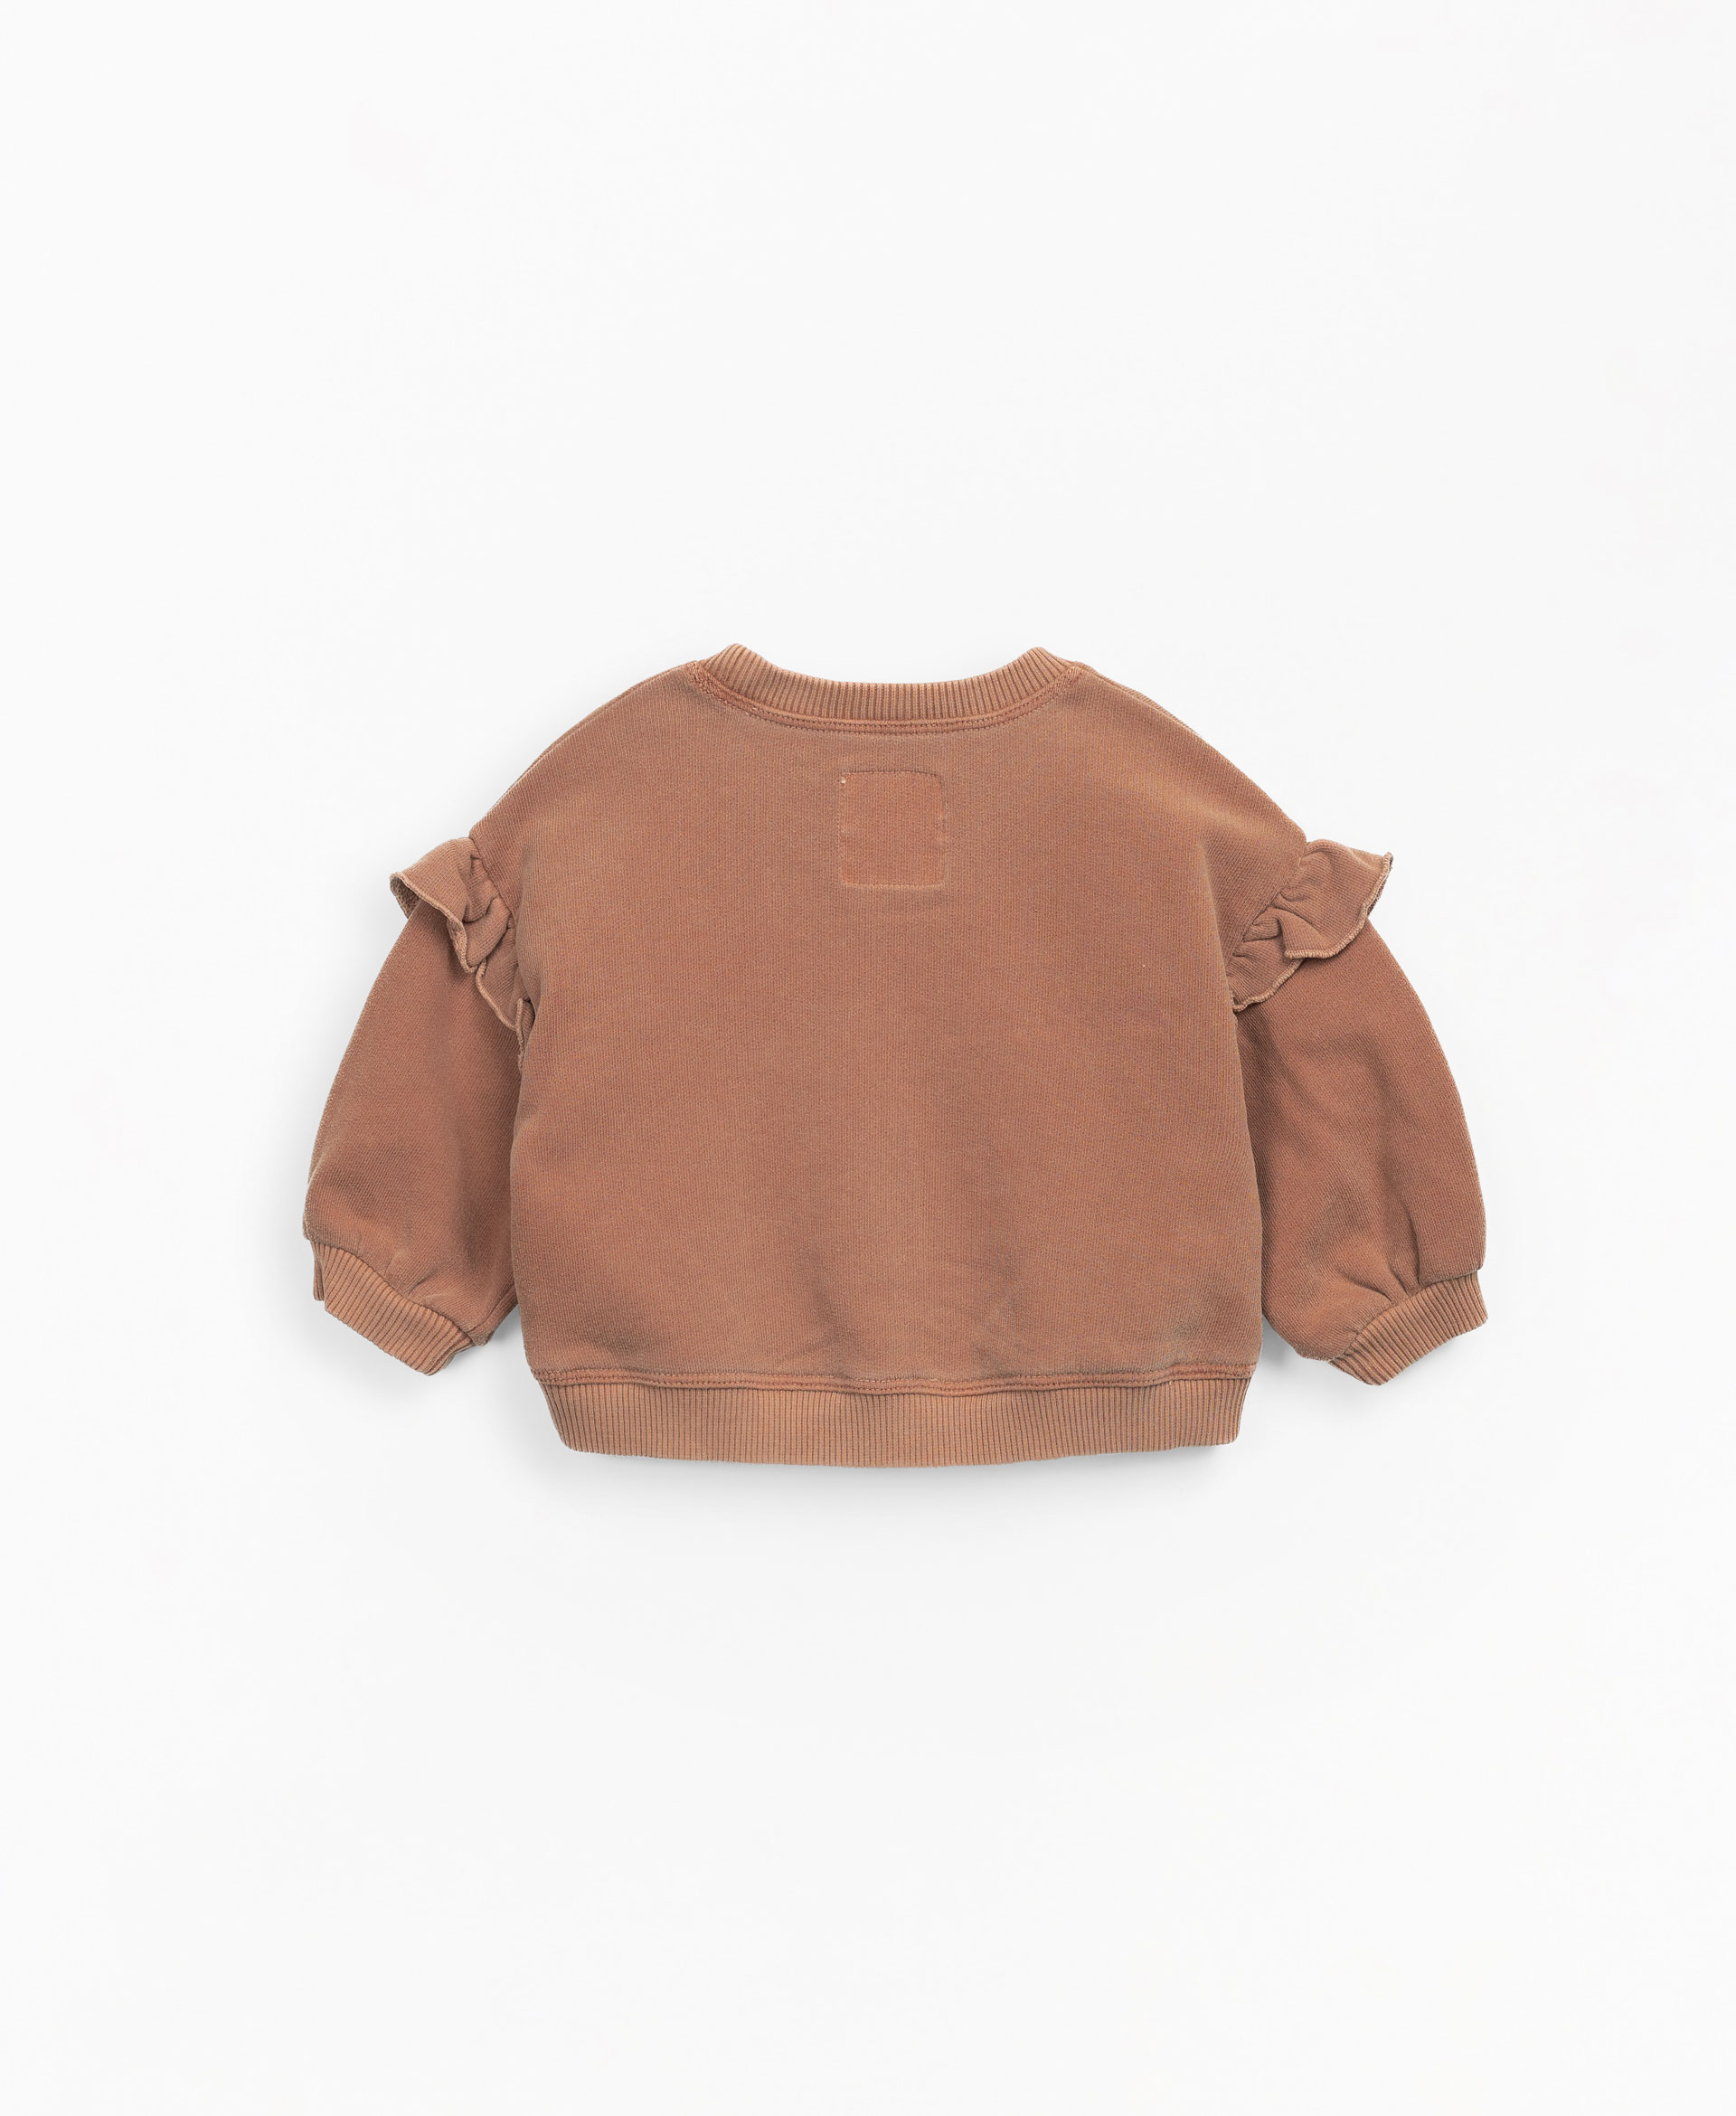 Naturally dyed sweater | Mother Lcia